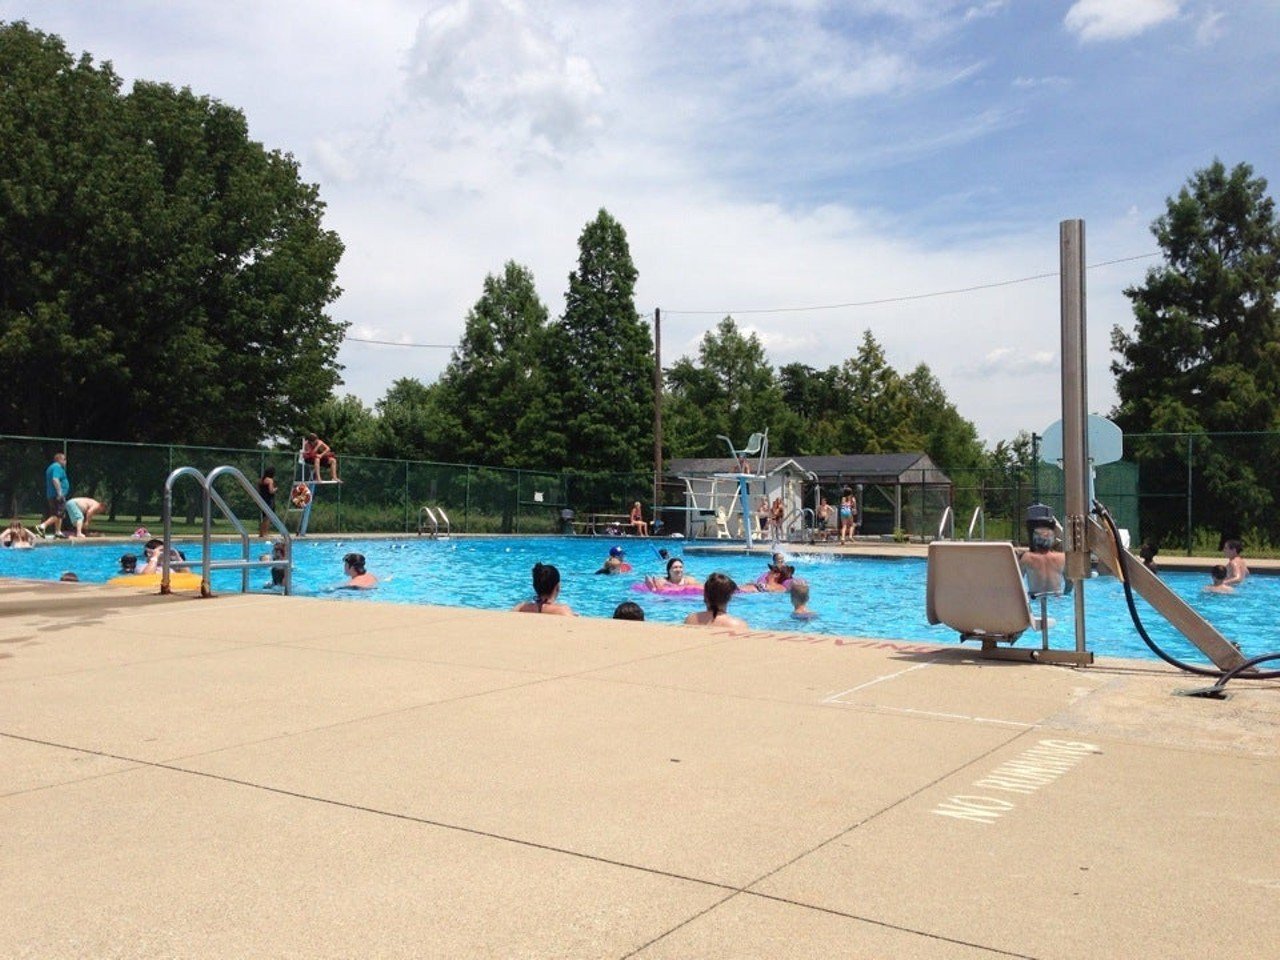 Sun Valley Pool 
6505 Bethany Ln 
Located in Valley Station, general admission is around $2-3 per person to visit this community pool.